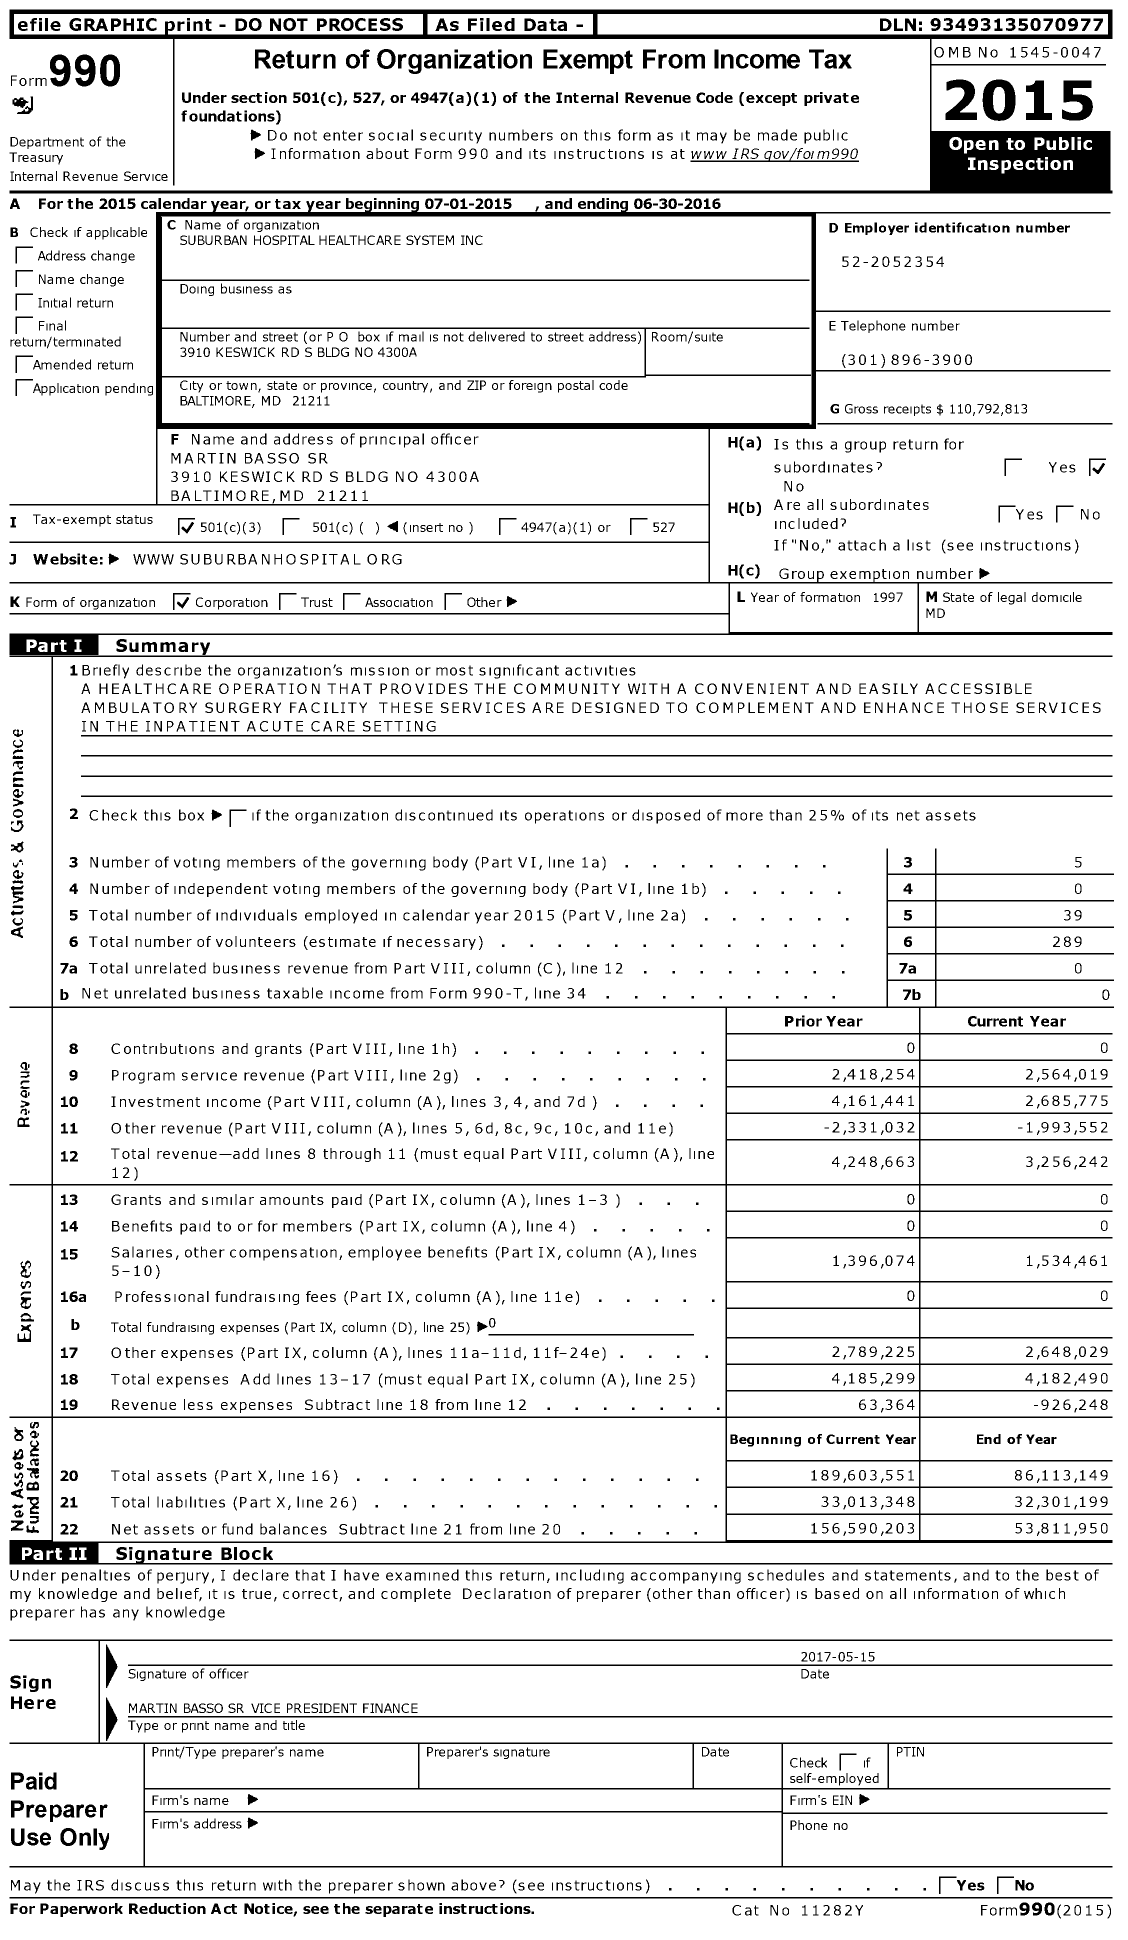 Image of first page of 2015 Form 990 for Johns Hopkins Medicine (JHM)